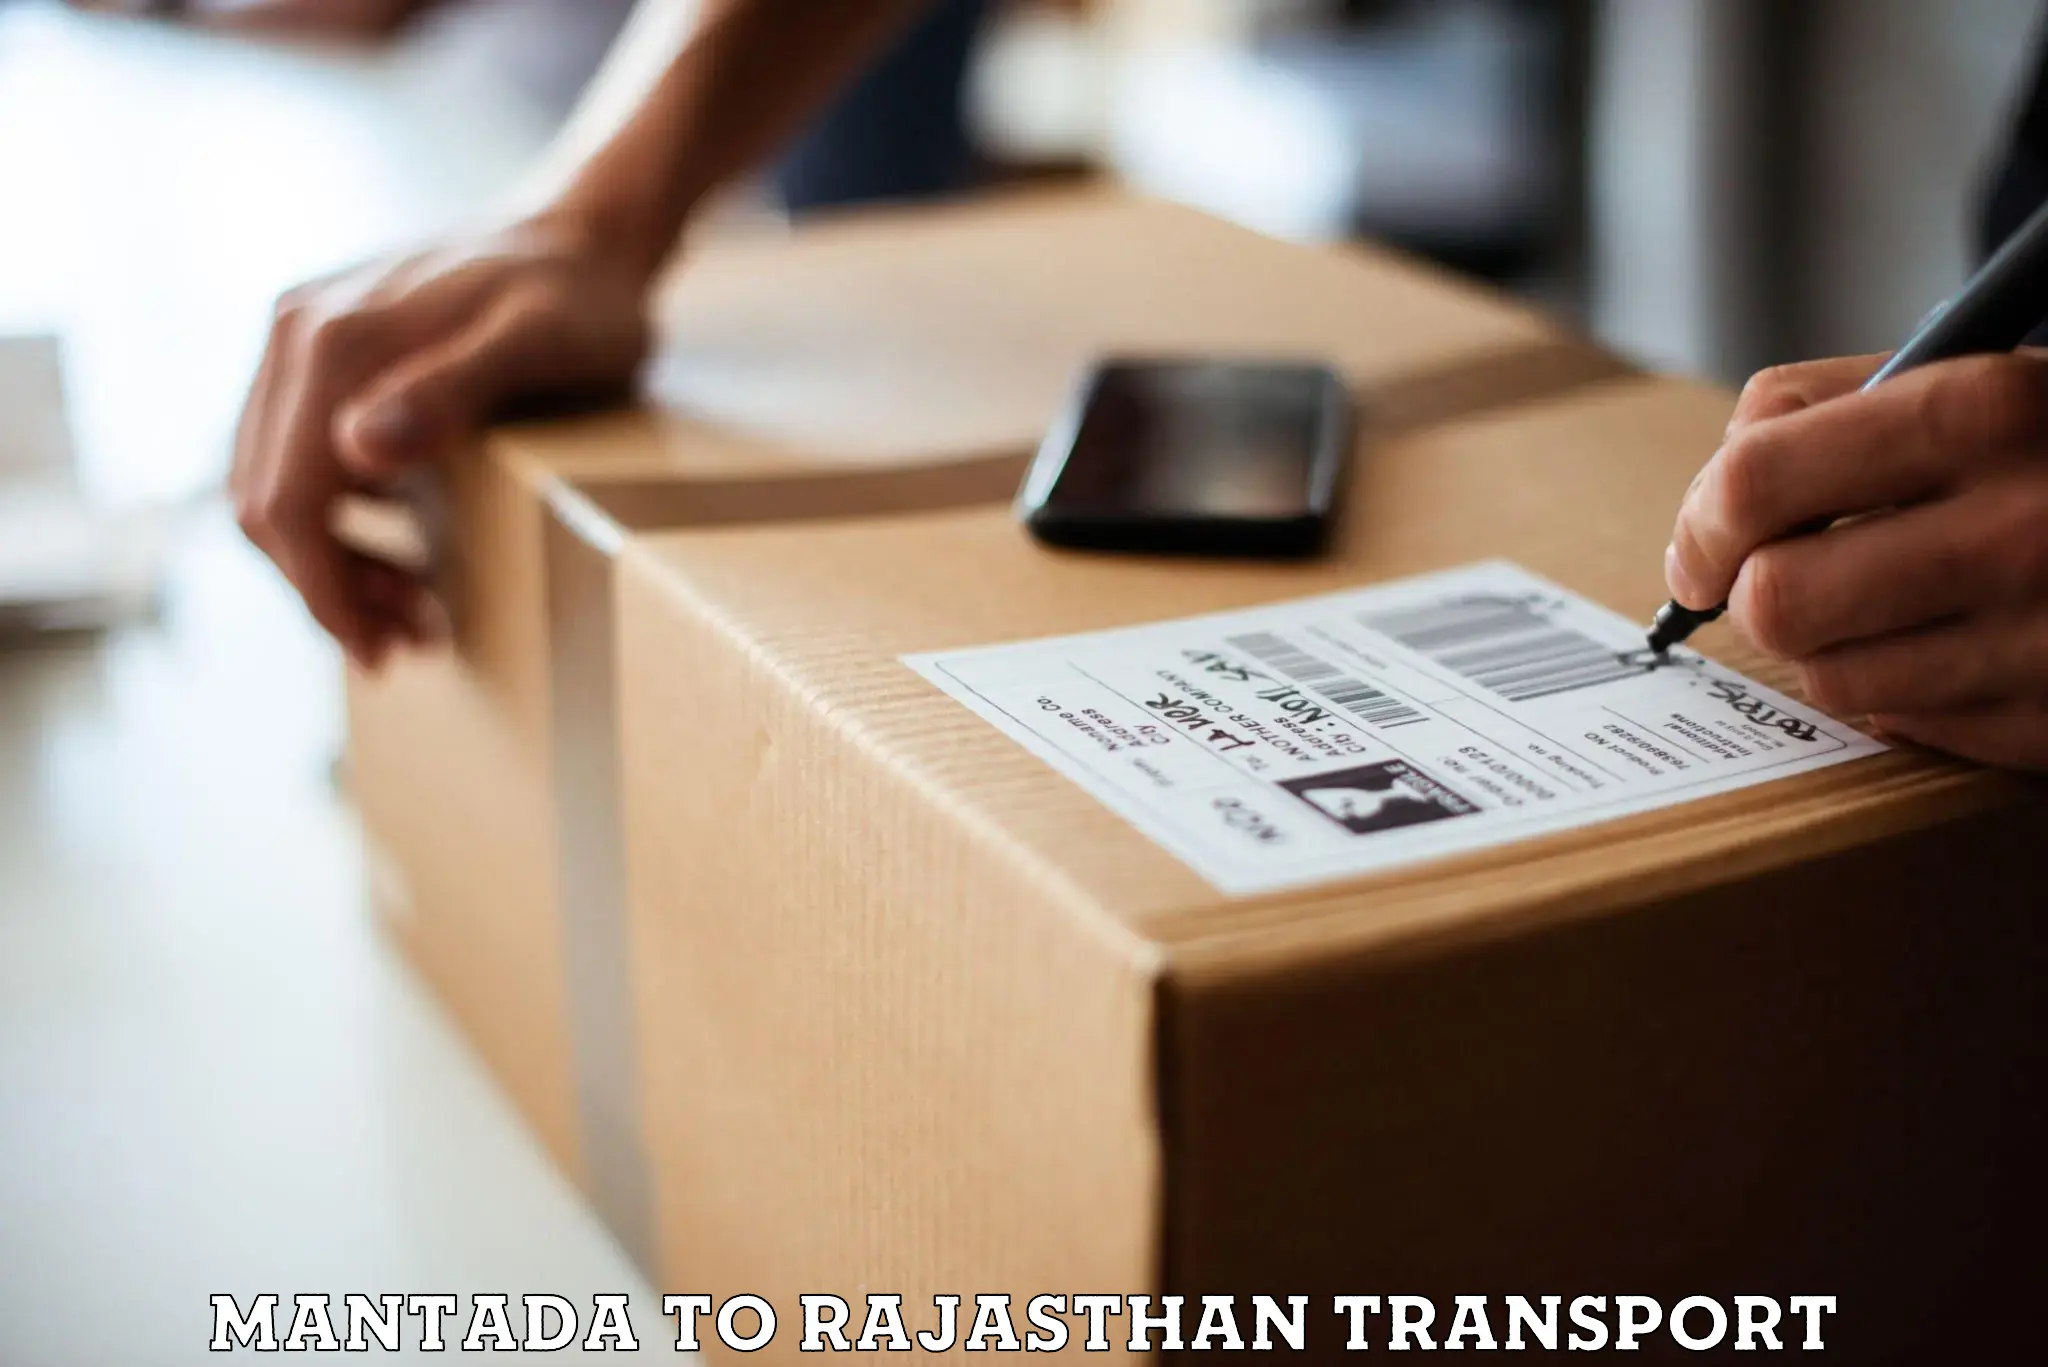 Commercial transport service Mantada to Rajasthan